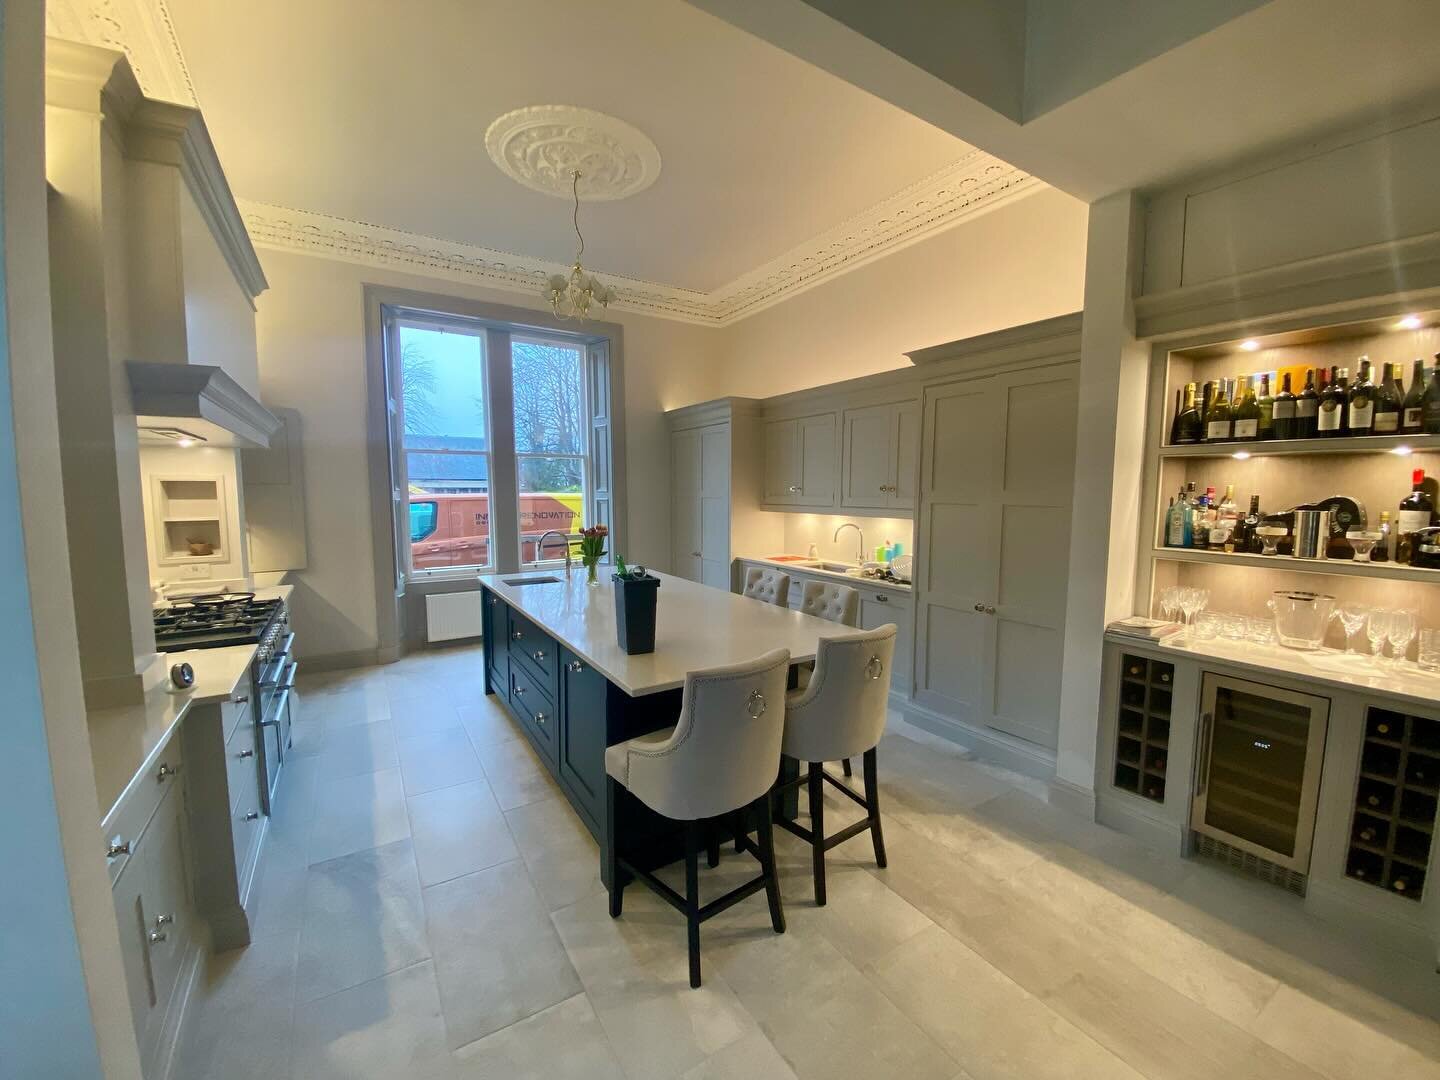 A snapshot of a completed project. More photos to follow. This project was the complete refurbishment of a large 12 bedroom property in South Edinburgh into a stunning family home.  #Architecture #Design #Architect #Home #HomeDecor
#Construction #Hom